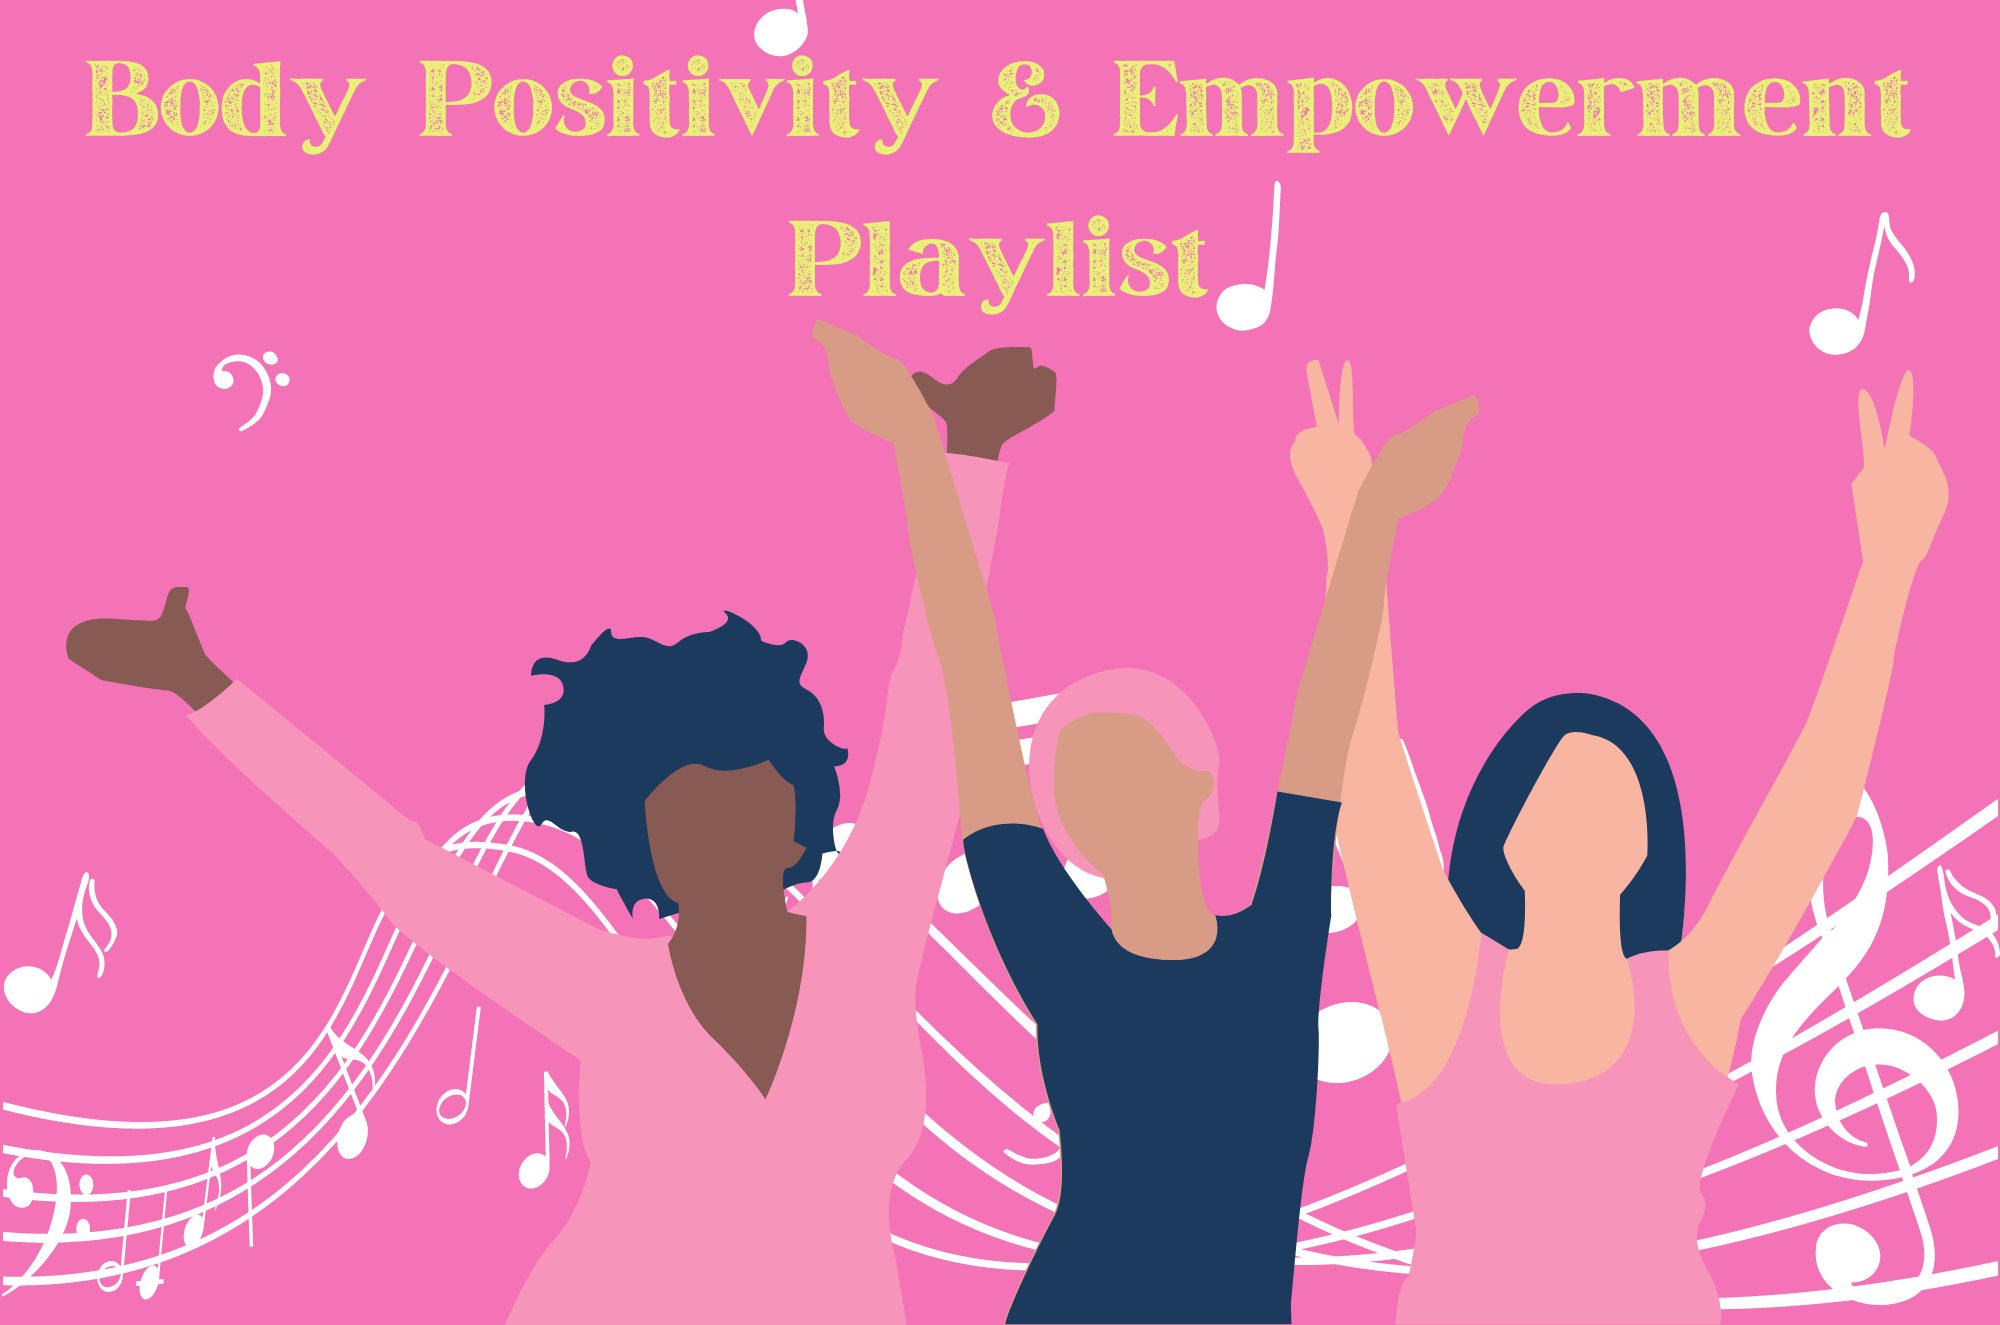 Image of 15 Body Positivity and Empowerment Songs You NEED Start Your New Year Off Right!